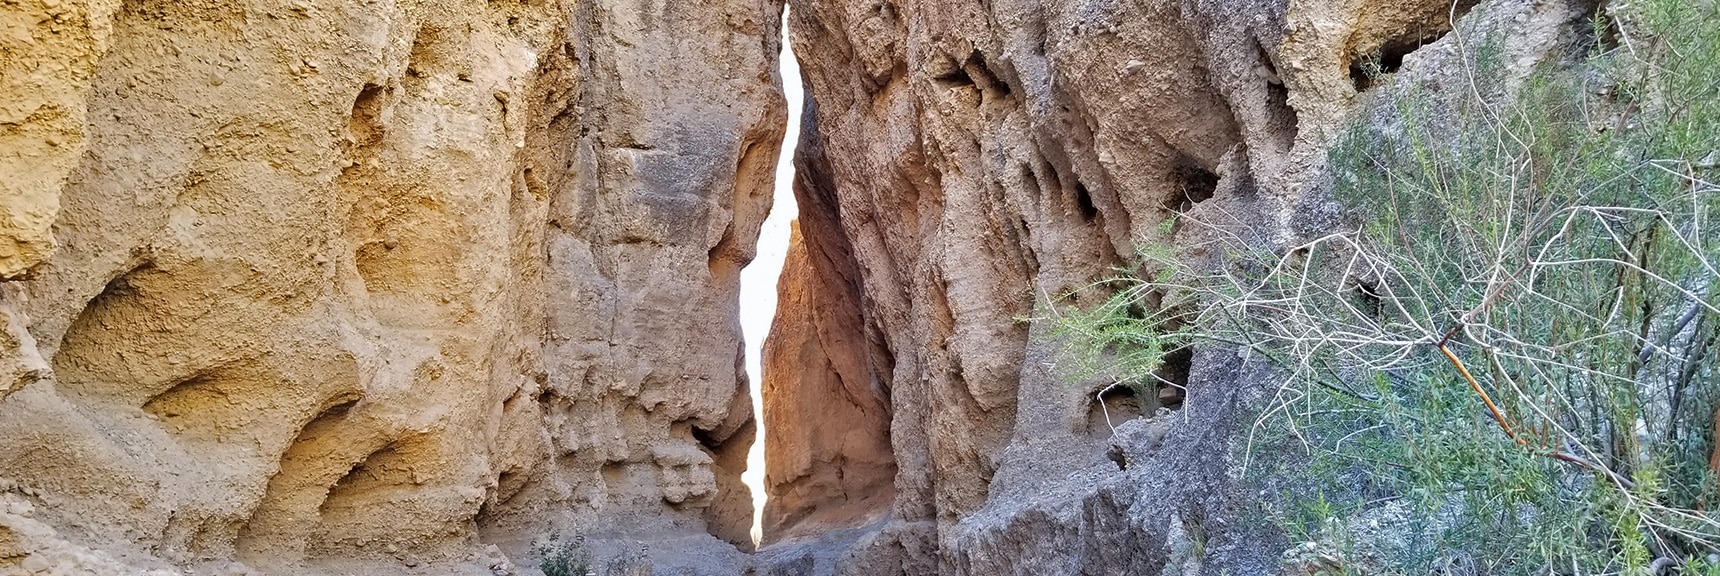 Narrow Portion of the Slot Canyon, Ribbon of Light Ahead | Harris Springs Canyon | Biking from Centennial Hills | Spring Mountains, Nevada